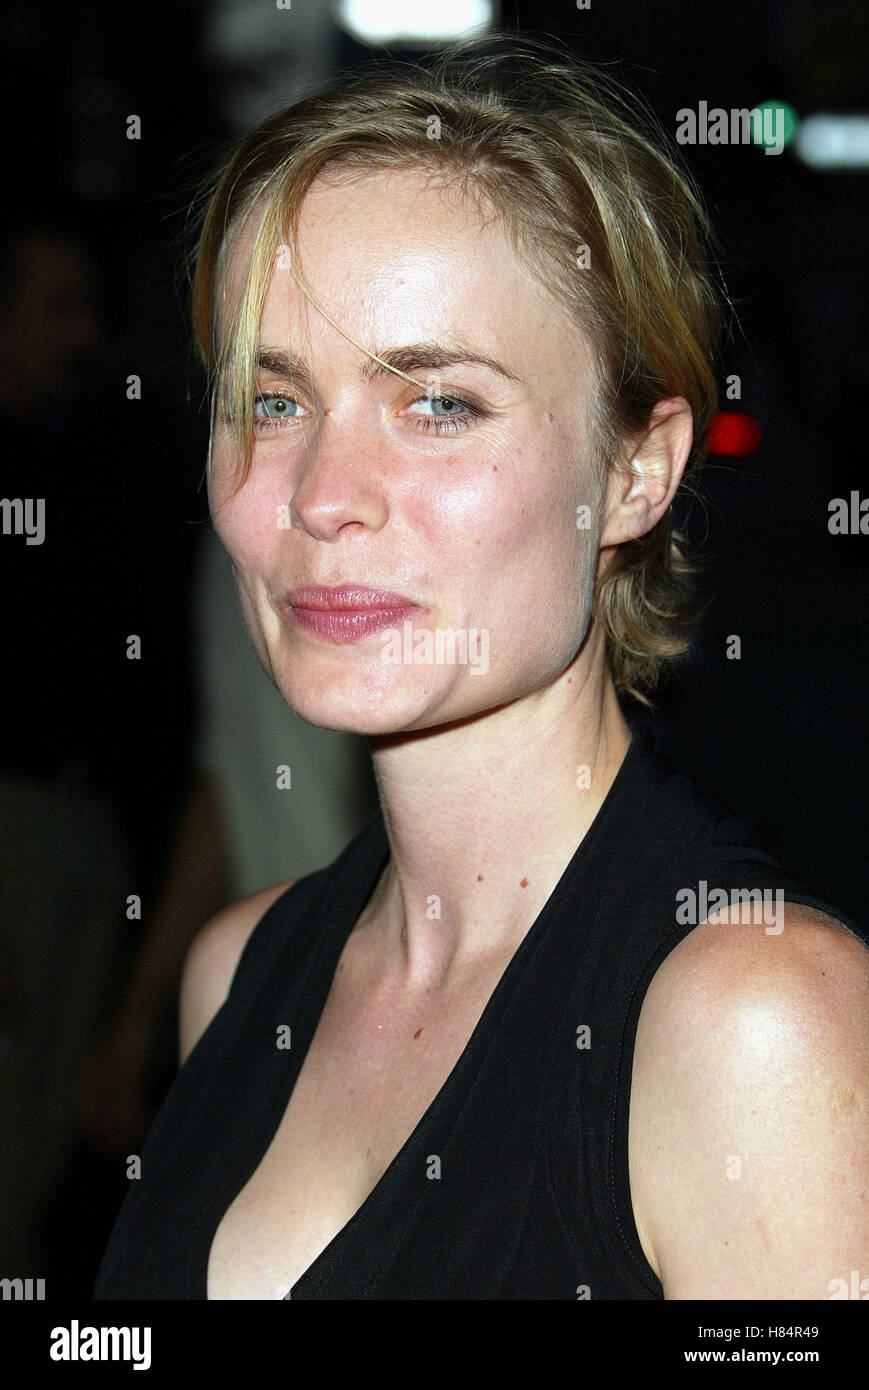 RADHA MITCHELL OUTFEST 2002 LA GAY FILM FEST THE ORPHEUM THEATRE DOWNTOWN LOS ANGELES USA 11 July 2002 Stock Photo